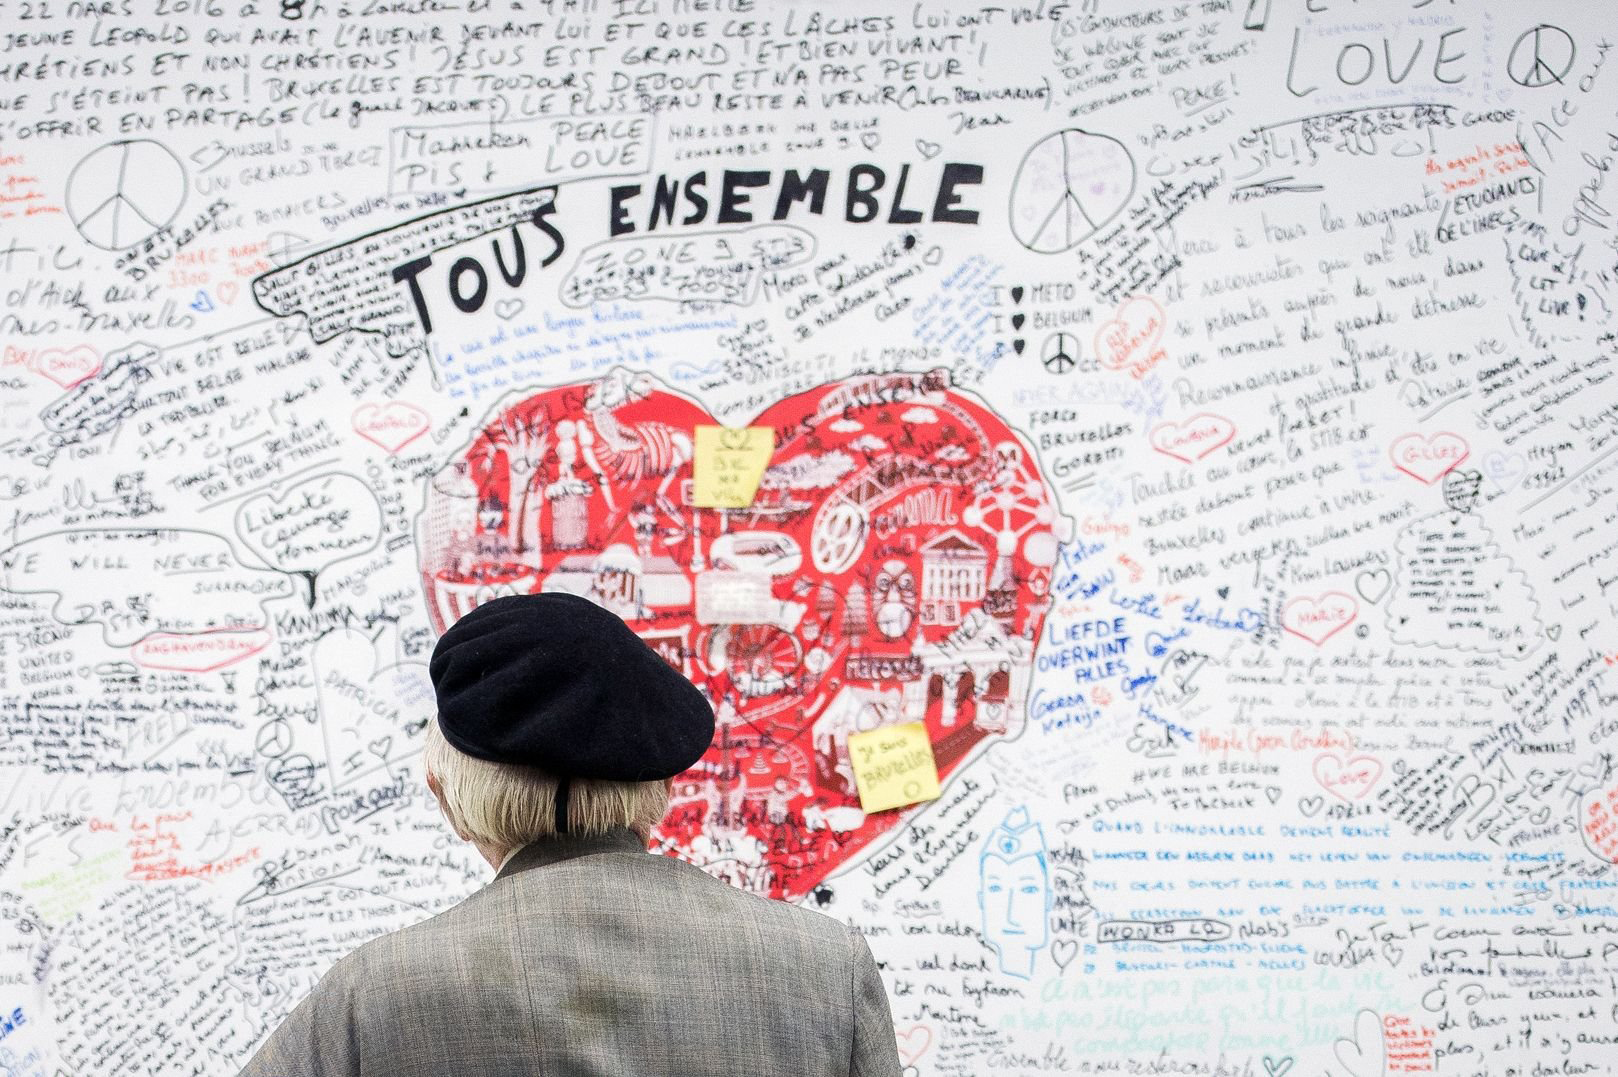 A man looks at a memorial panel for the victims of the March 22 attacks at the entrance of the Maelbeek-Maalbeek subway station in Brussels on May 11, 2016.